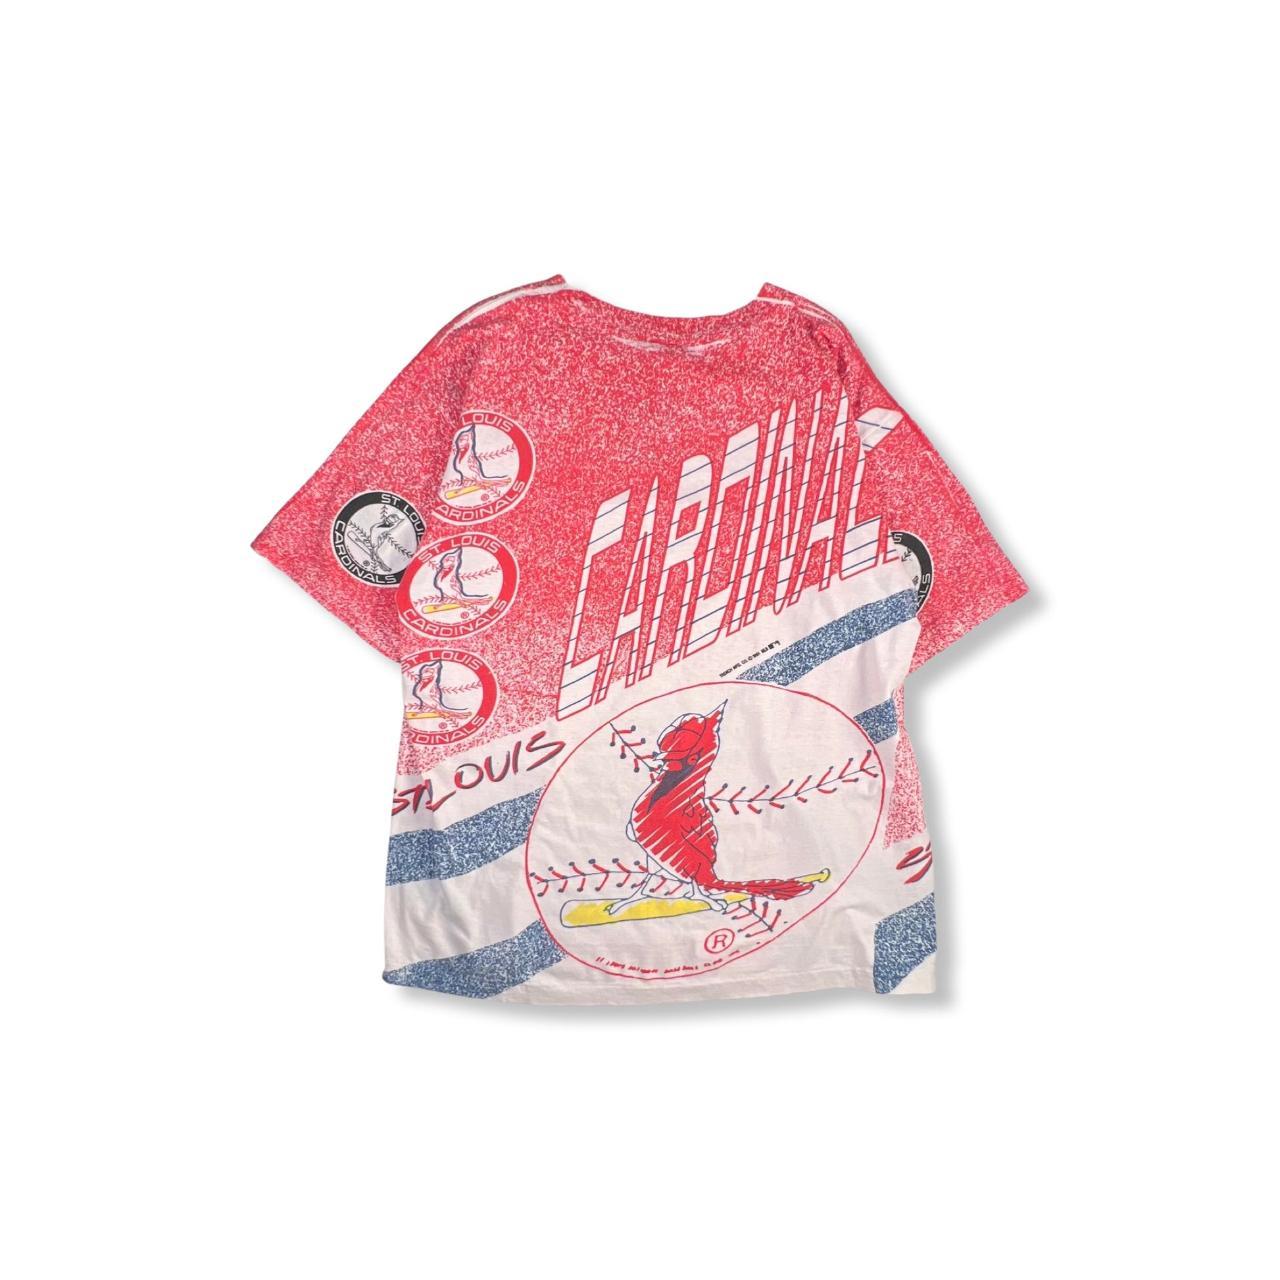 St Louis Cardinals Youth Shirt Vintage 